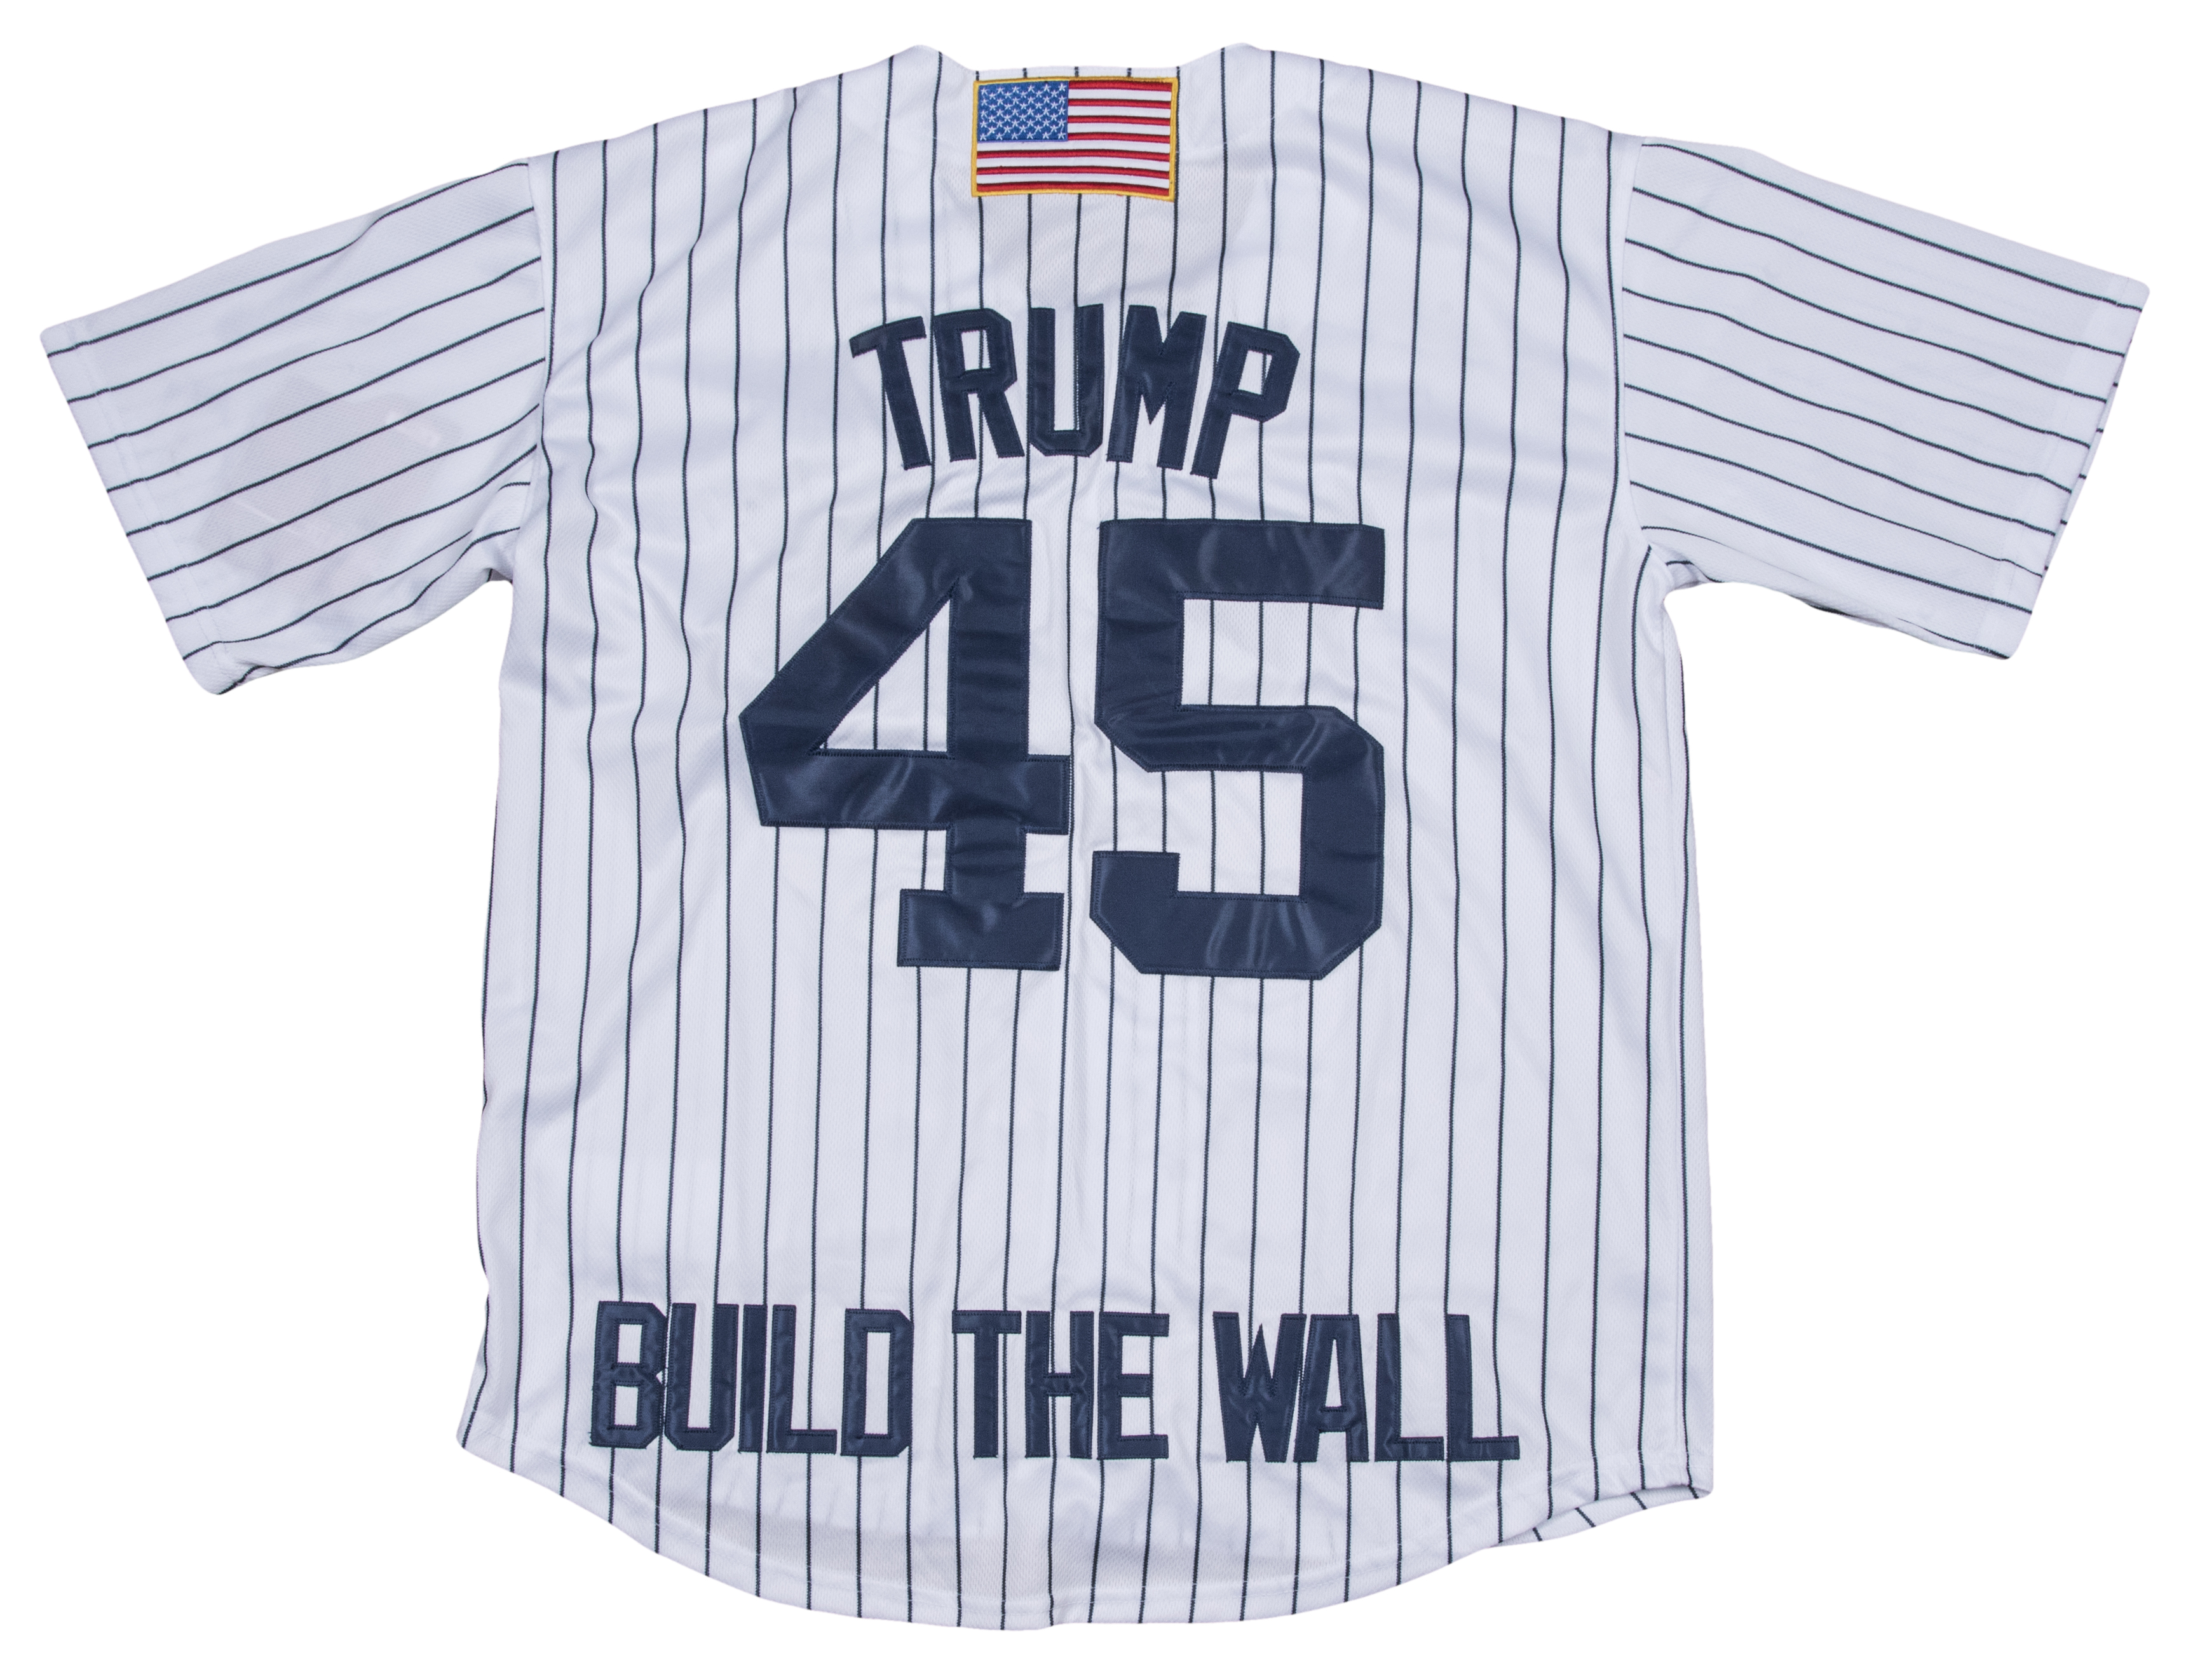 yankees 45 on jersey